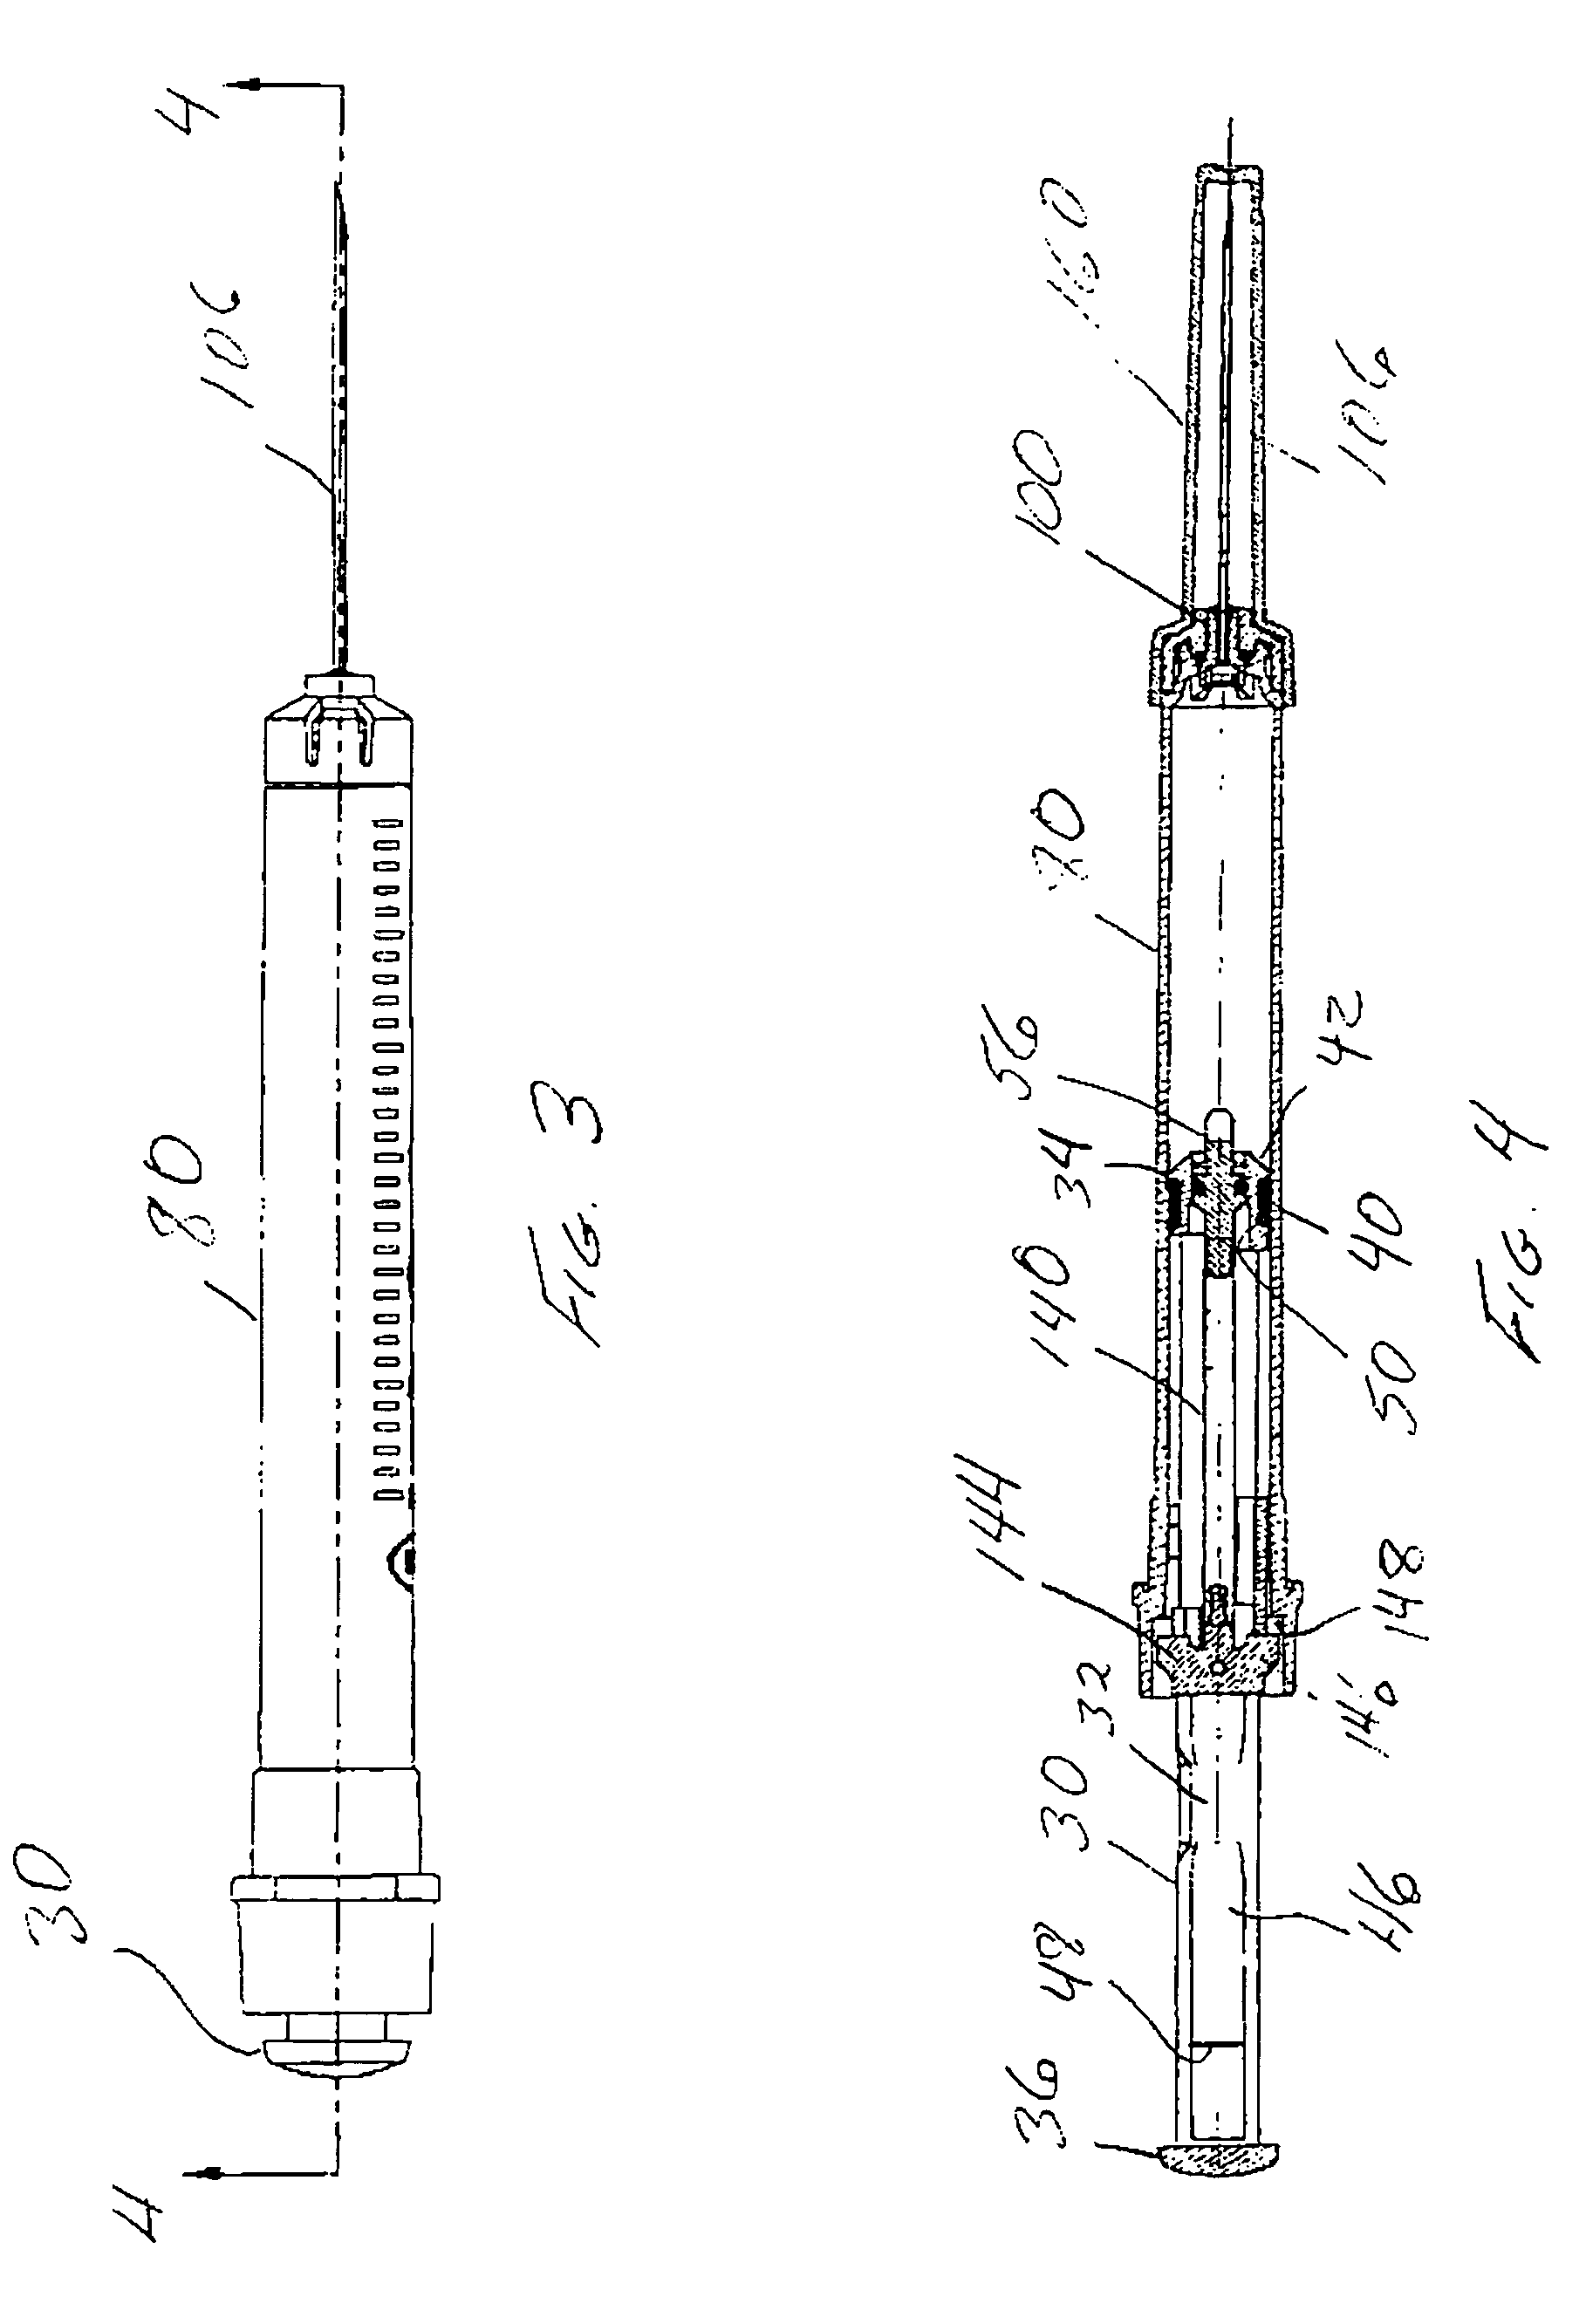 Syringe with retractable needle assembly